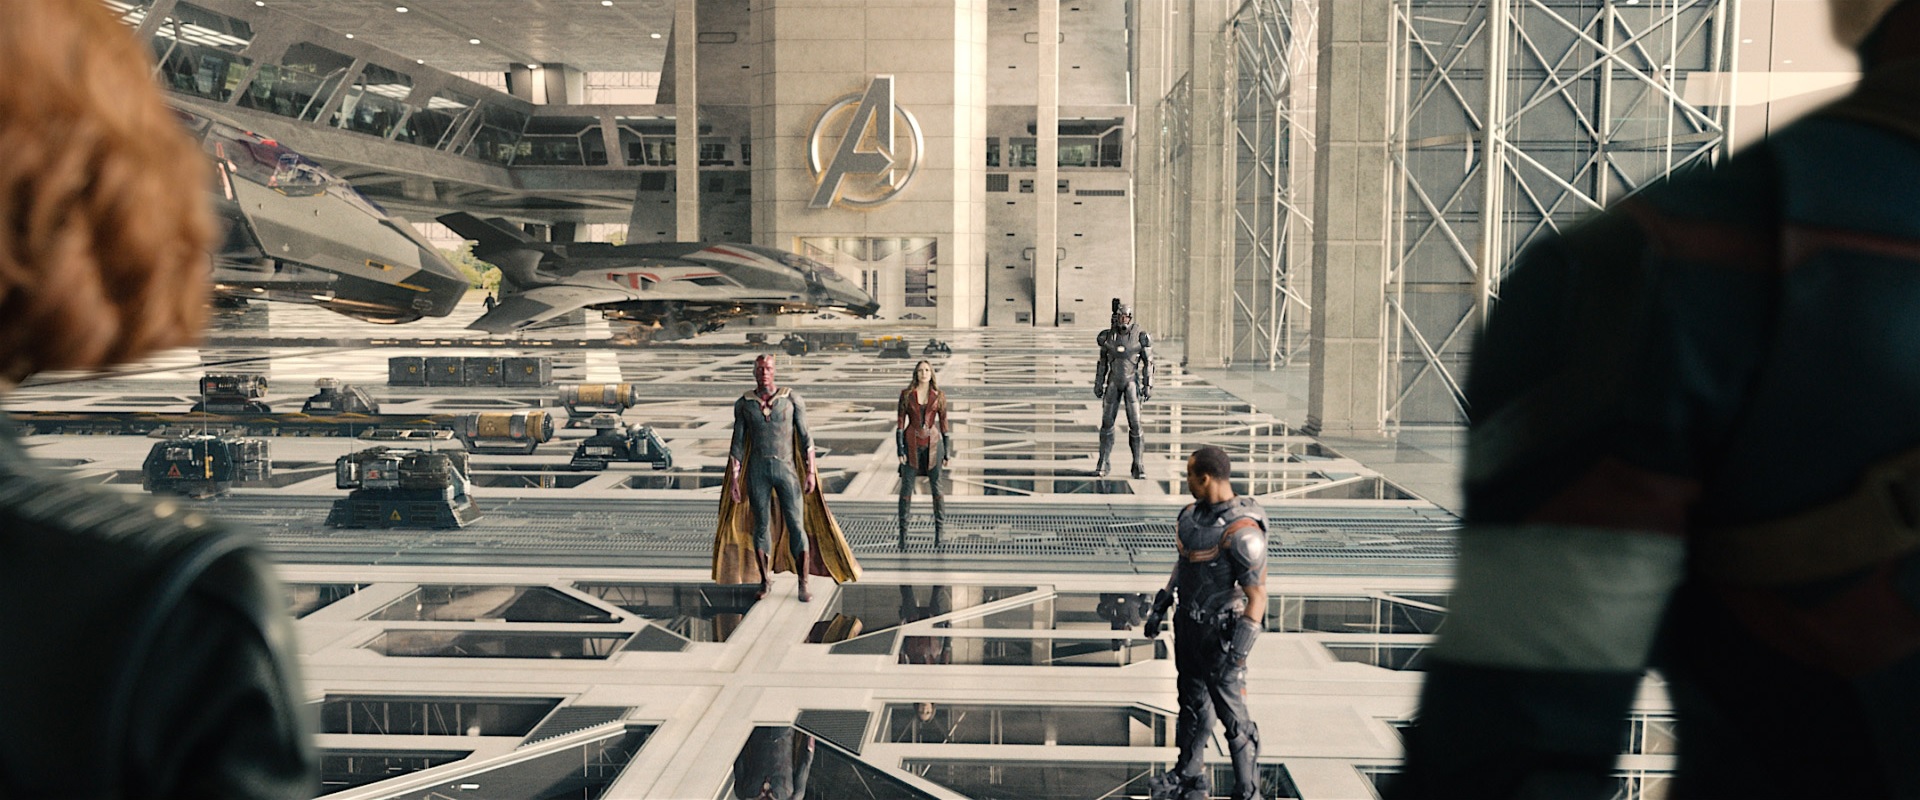 Stark/Avengers Tower, New York  MCU Location Scout – MCU: Location Scout